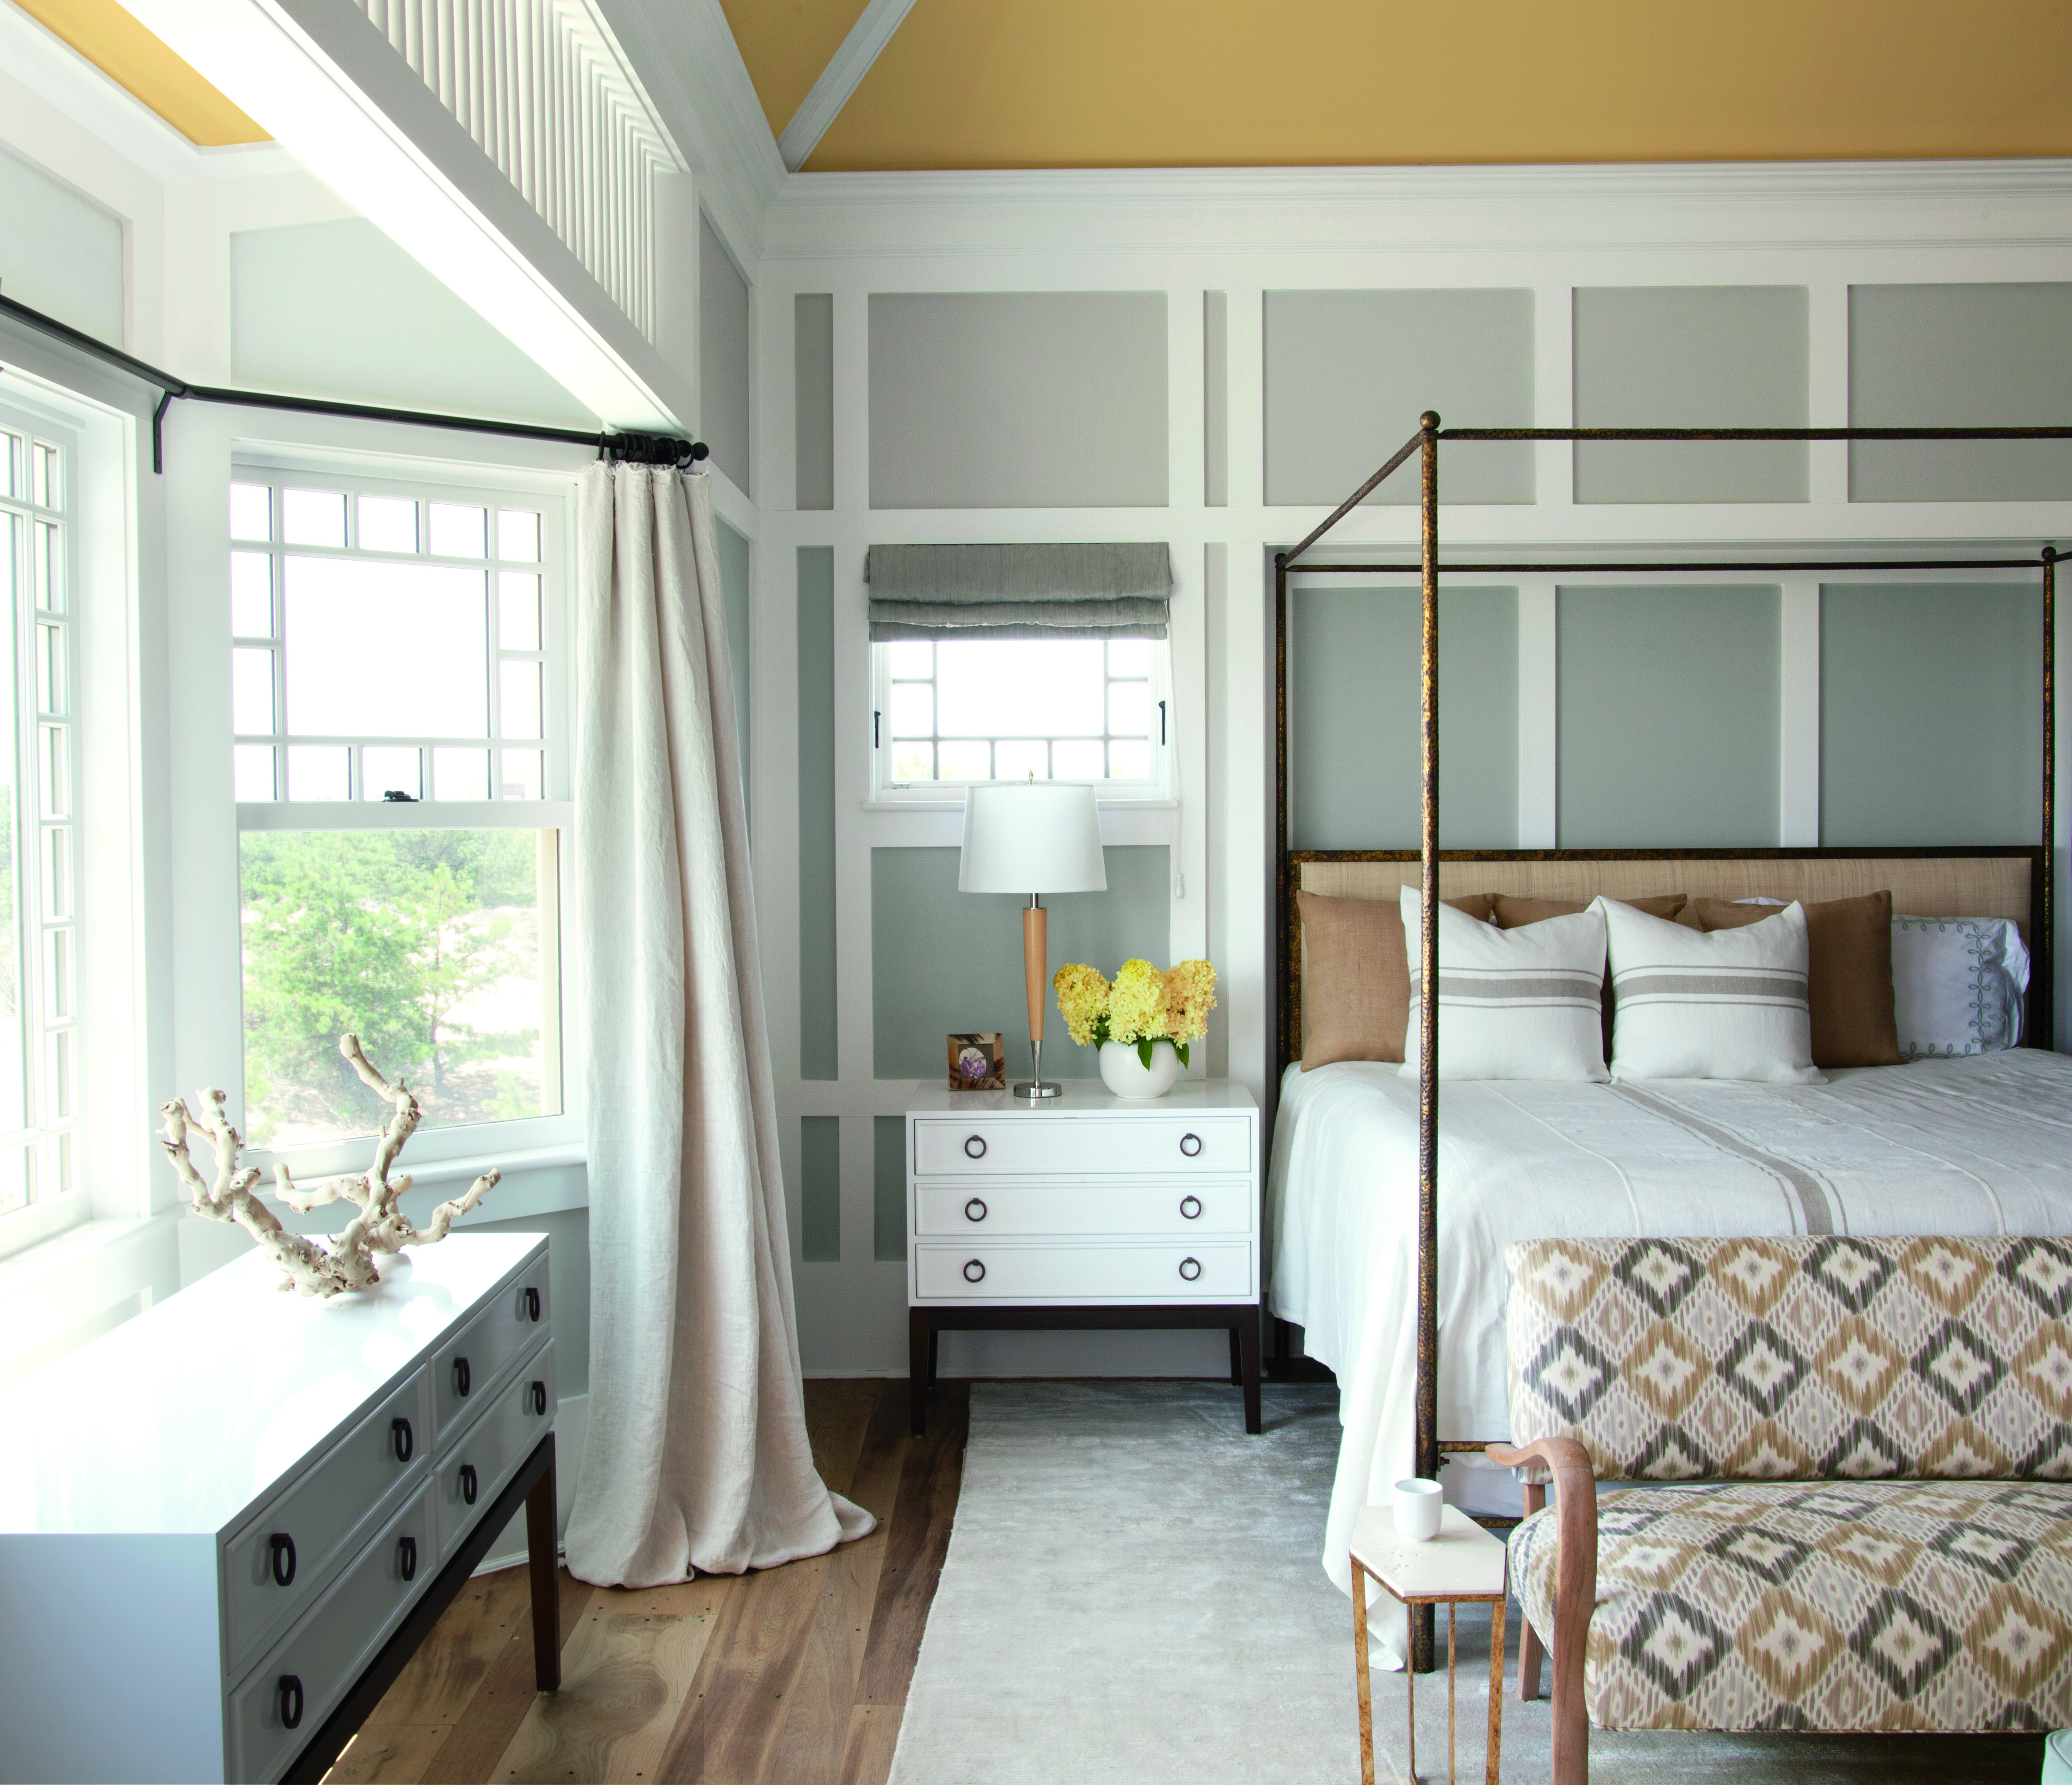 The best bedroom colors illustrated in a pale blue-gray and white scheme with wall panelling, white furniture and a bronze four poster bed with white bed linen.